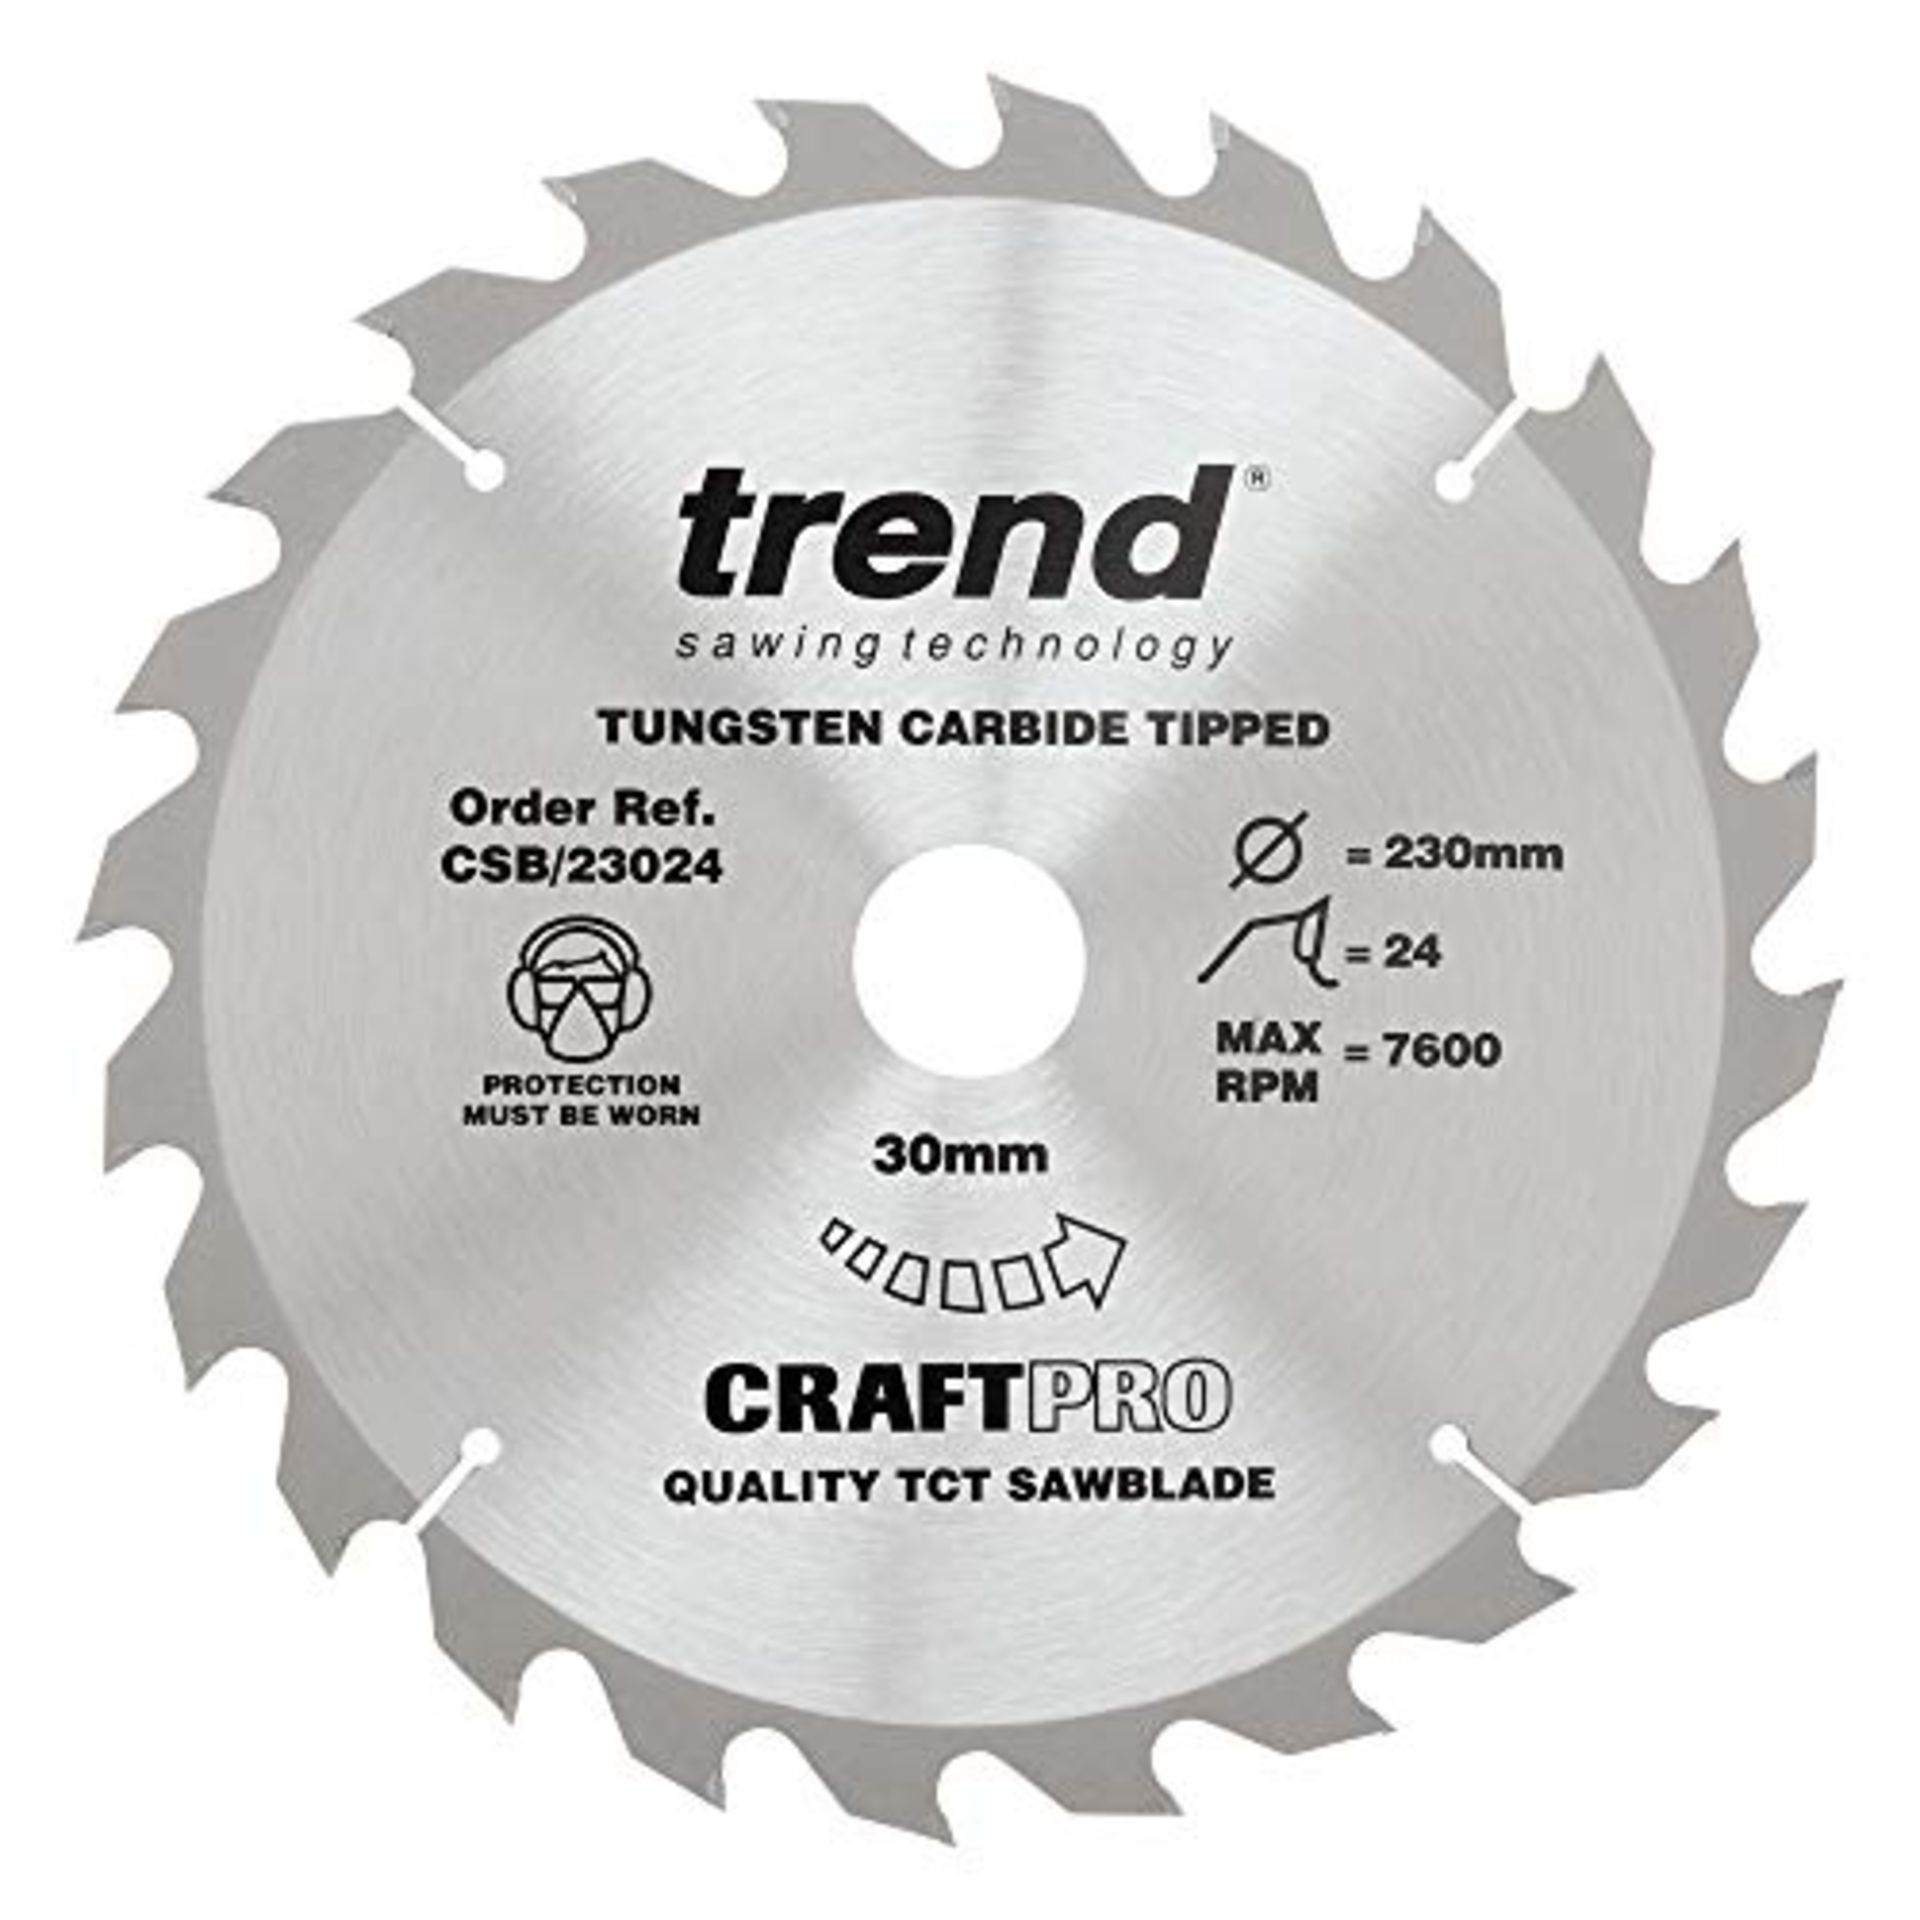 7 x Various trend Saw blades, as listed | RRP £ 124.21